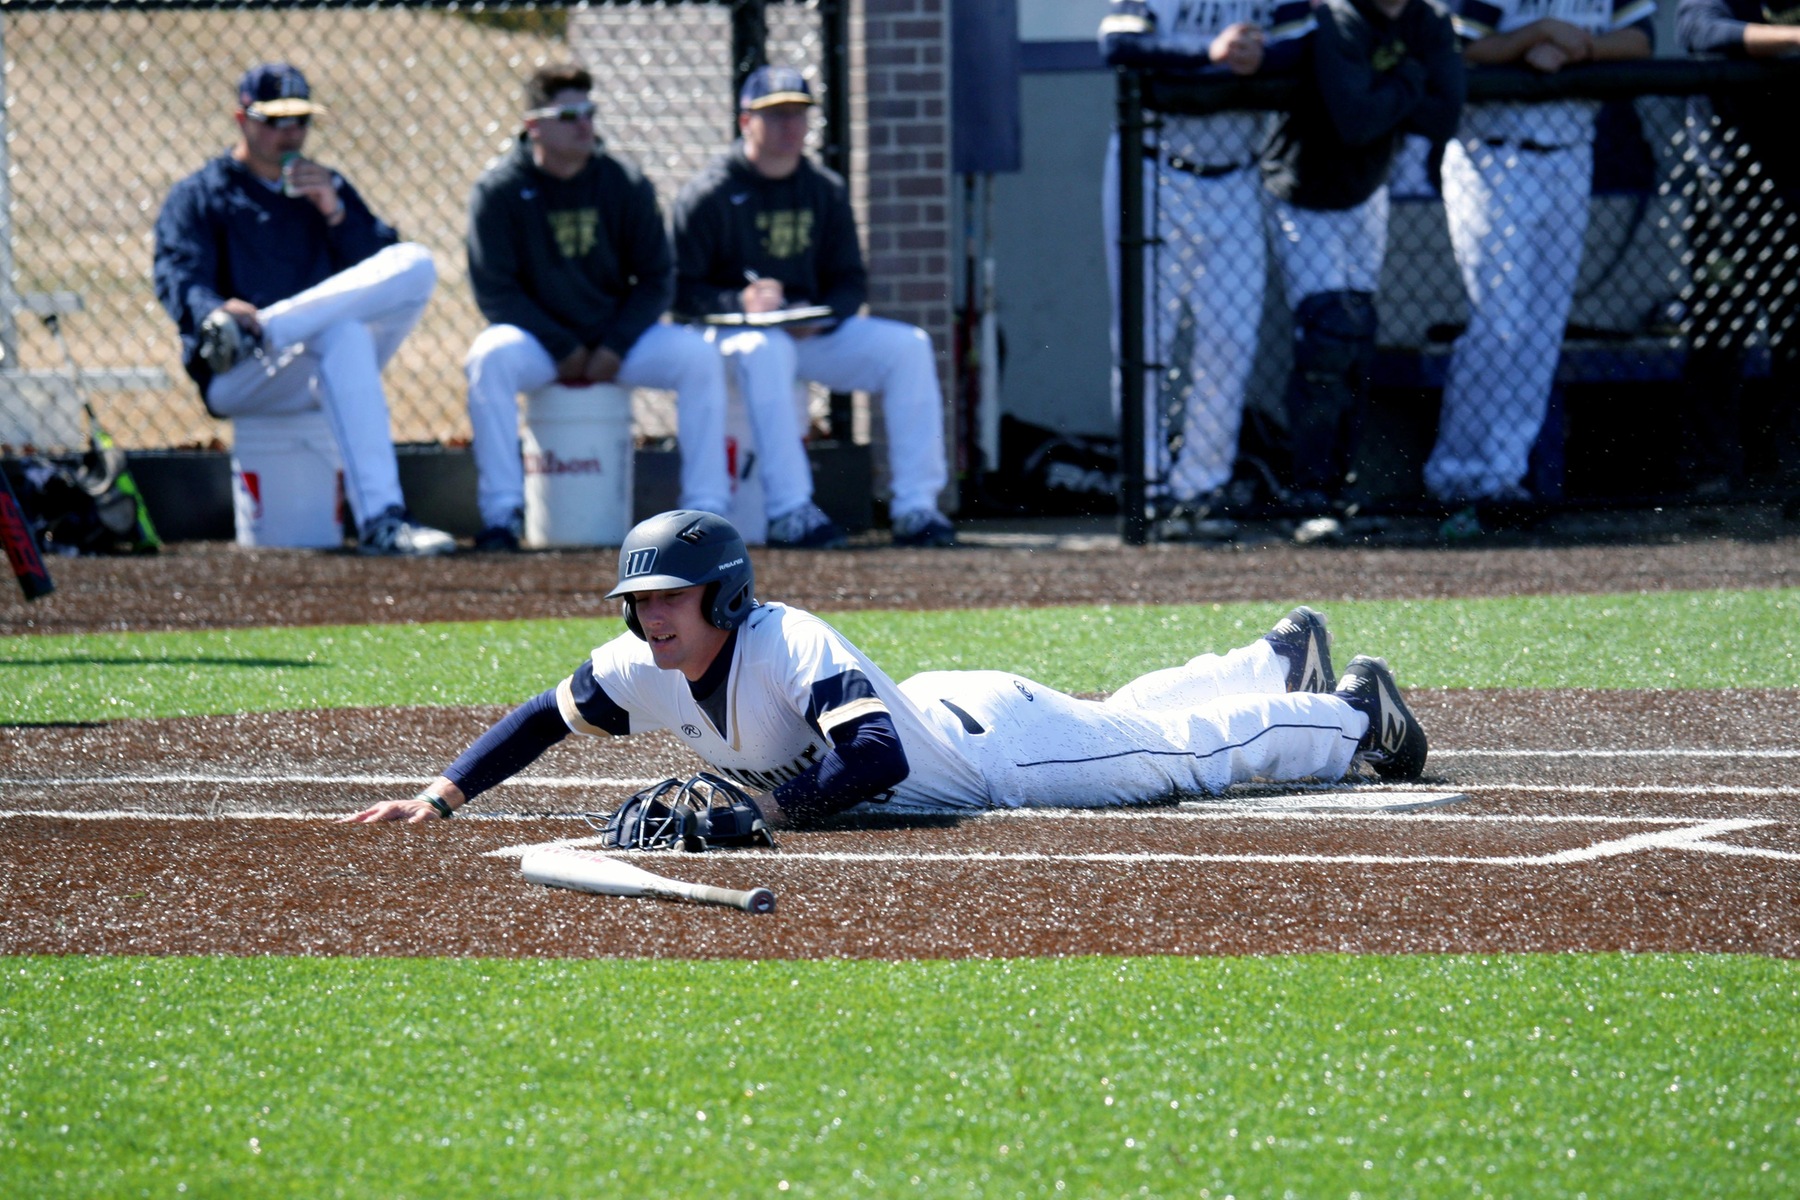 Bucs Roll over Colonels for Opening Day Win